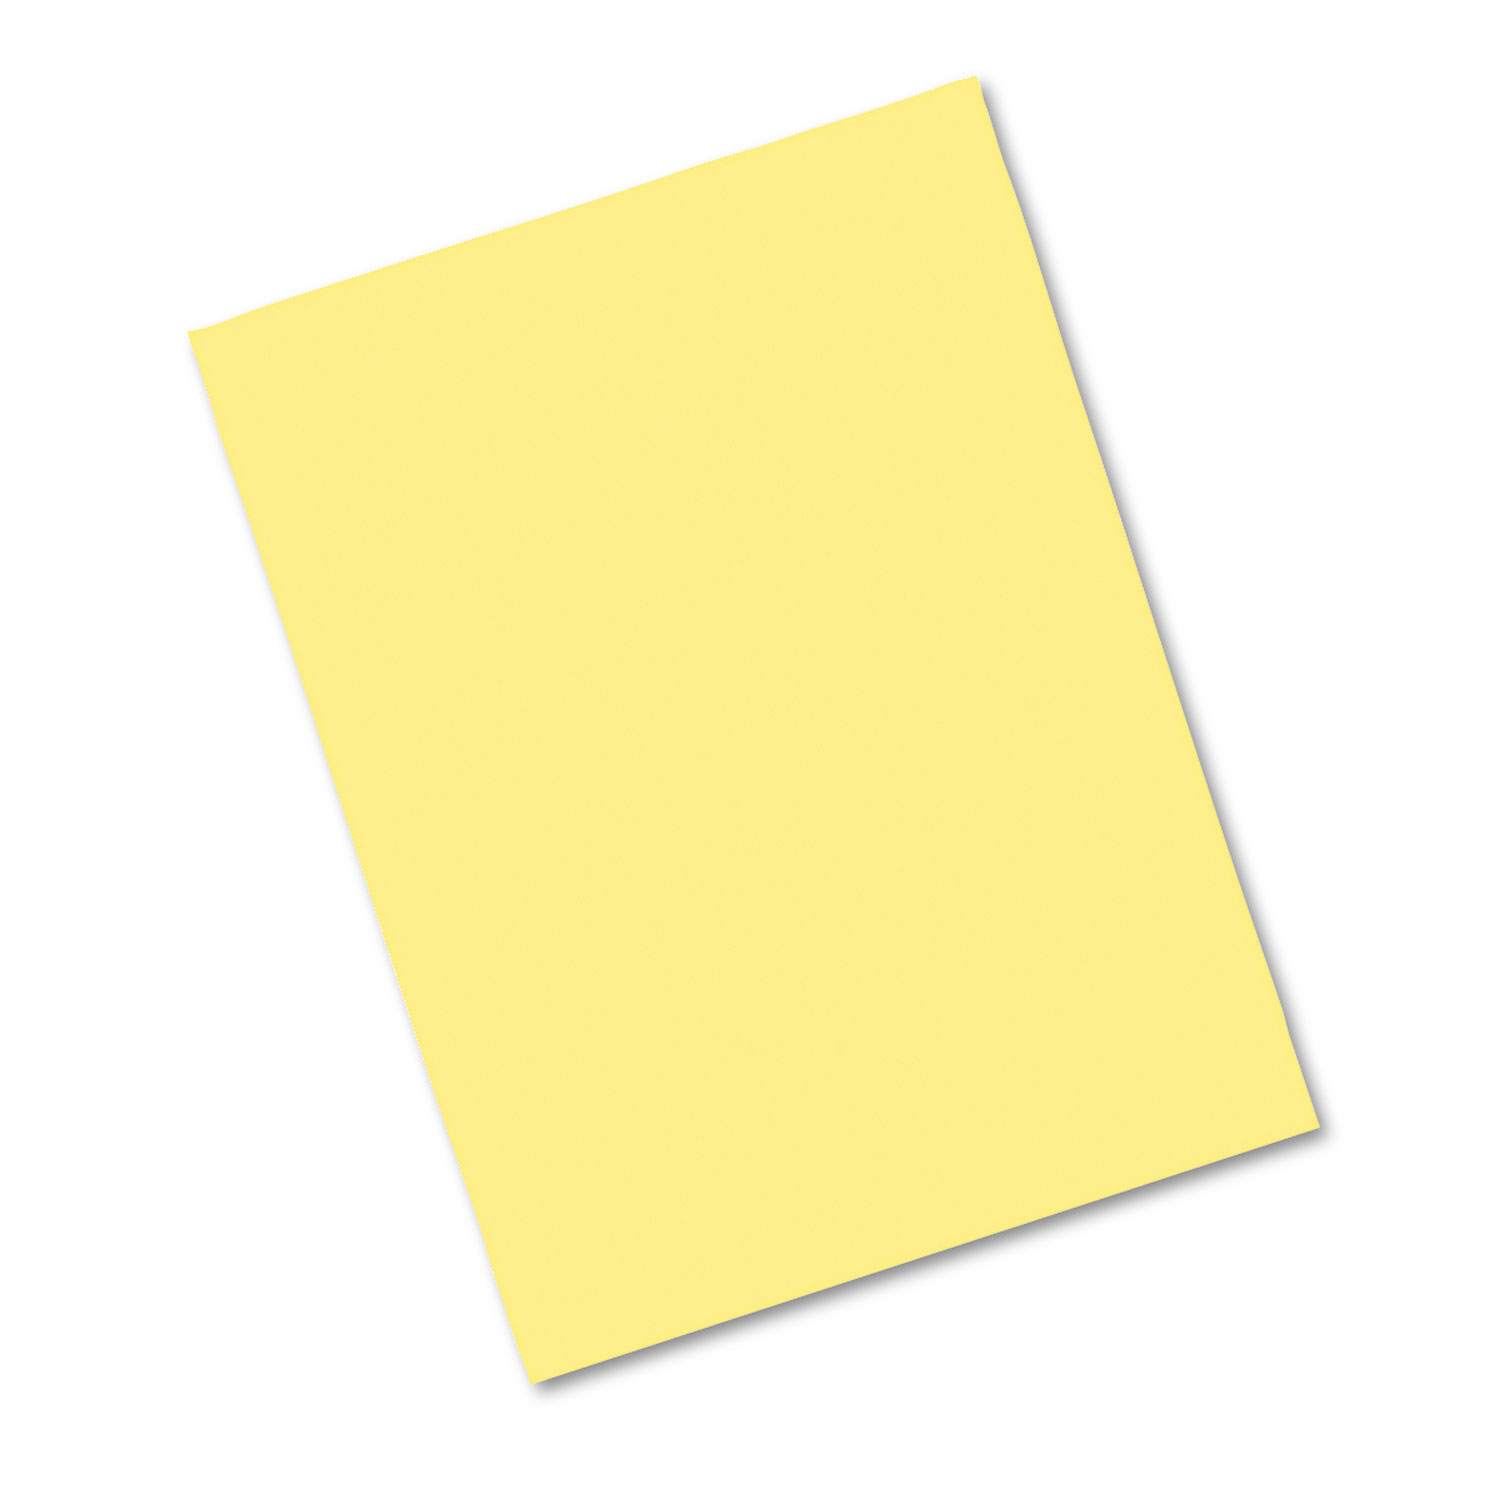  Pacon 103457 Riverside Construction Paper, 76lb, 18 x 24, Yellow, 50/Pack (PAC103457) 